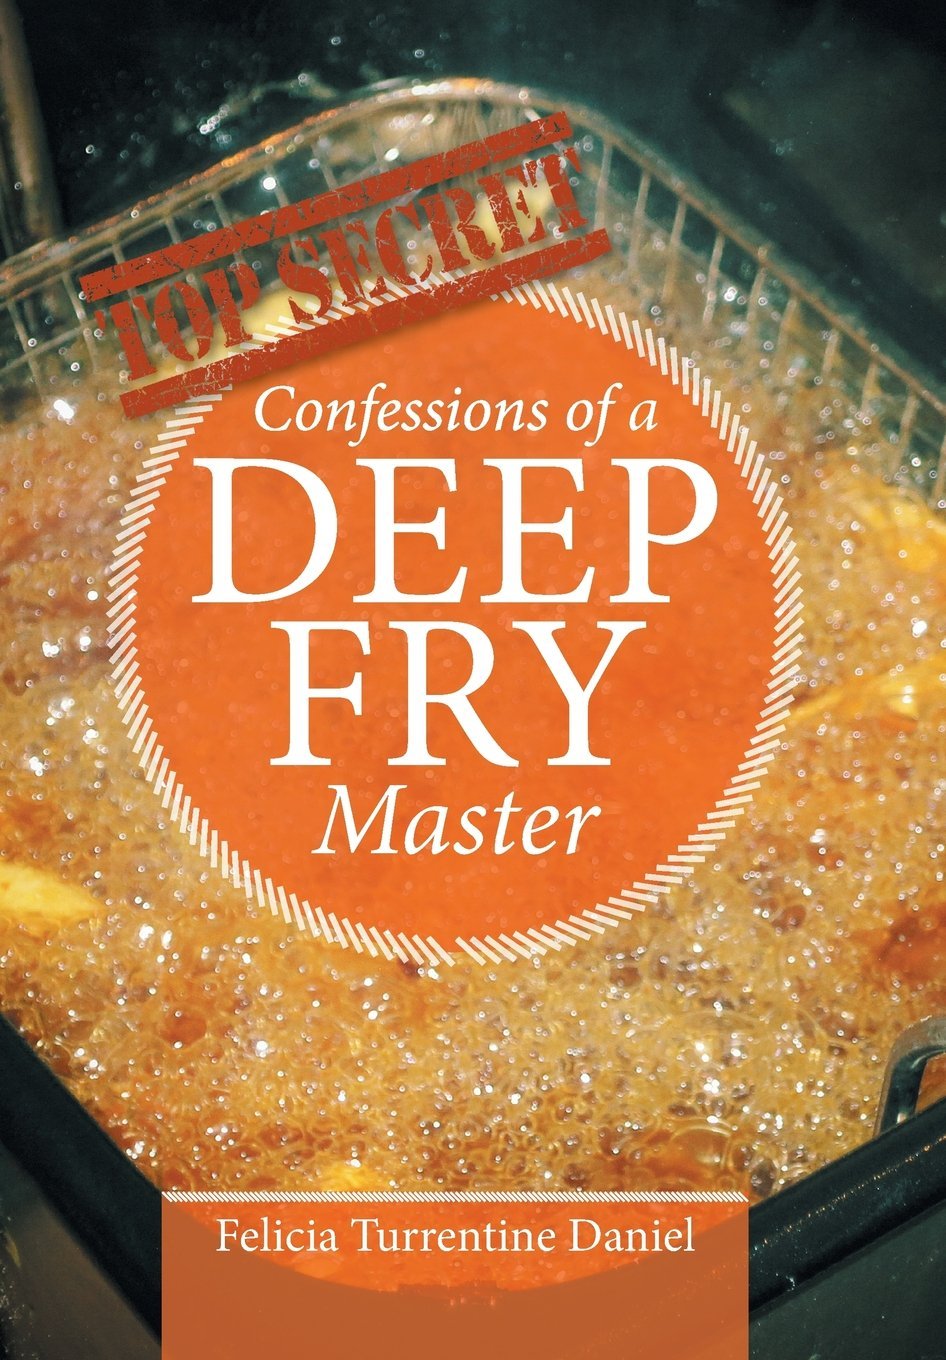 Confessions of a Deep Fried Master by Felicia Turrentine-Daniel